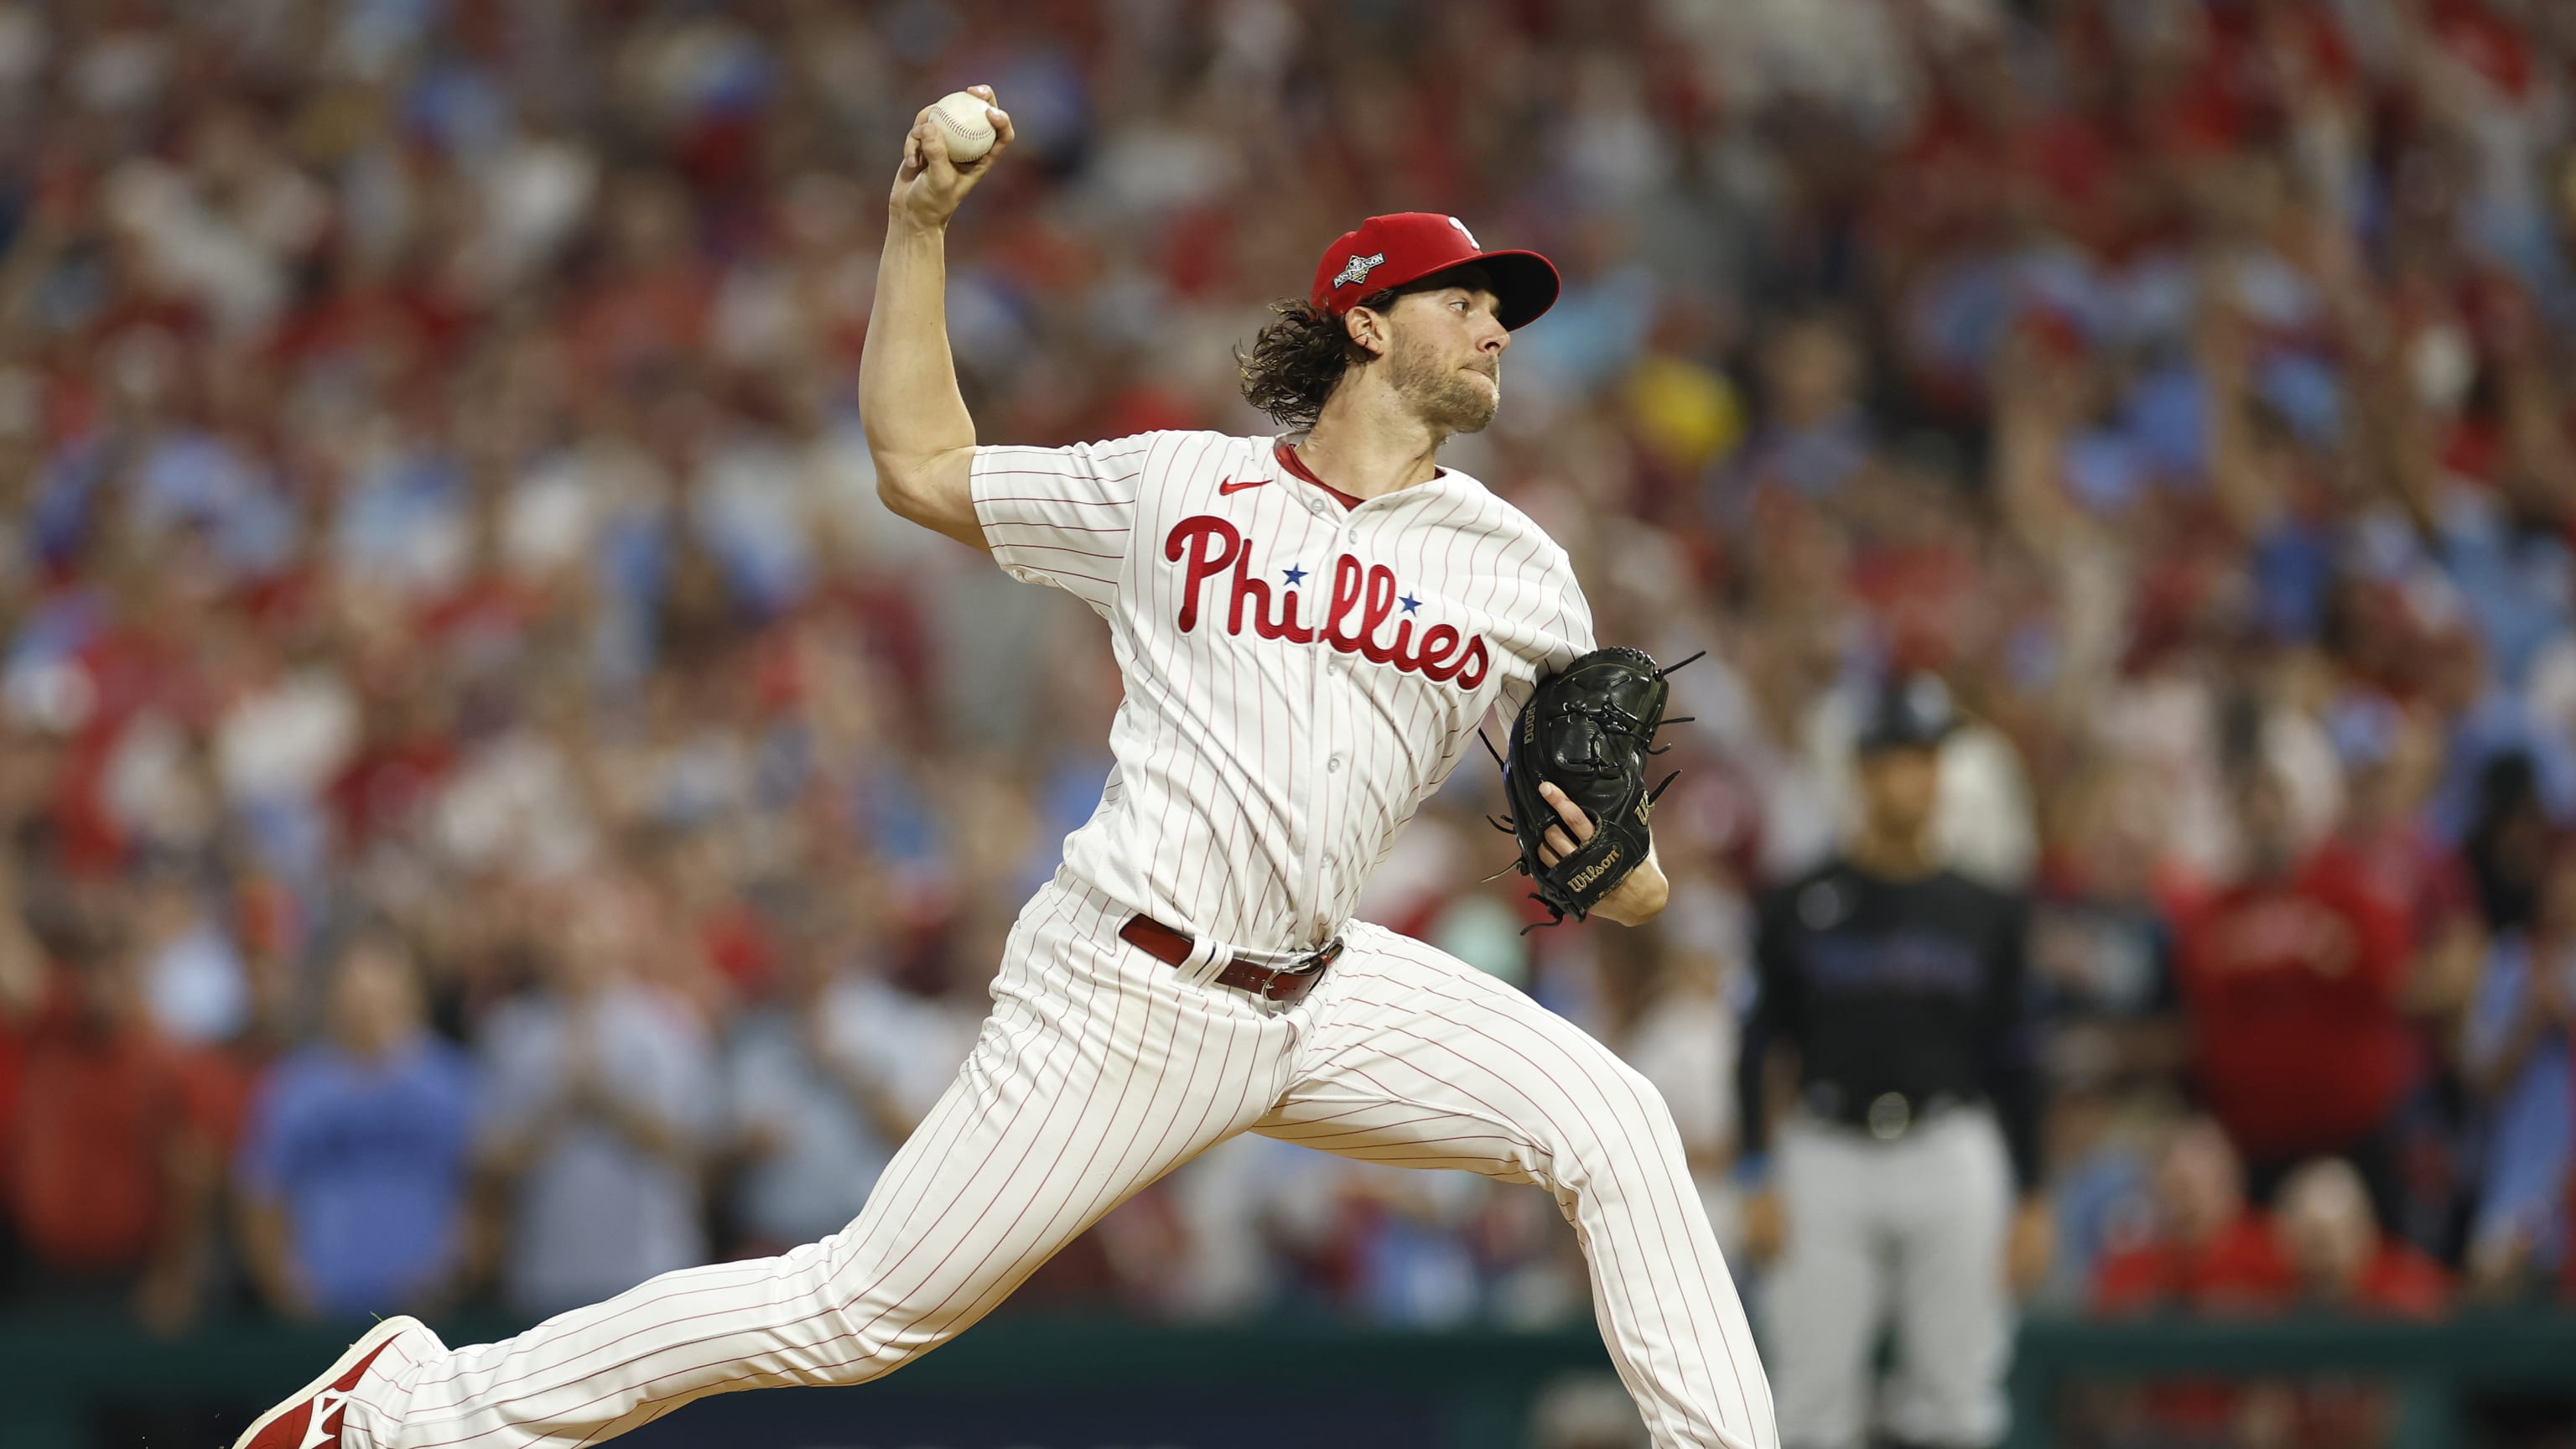 Braves vs. Phillies NLDS Game 3 starting lineups and pitching matchup